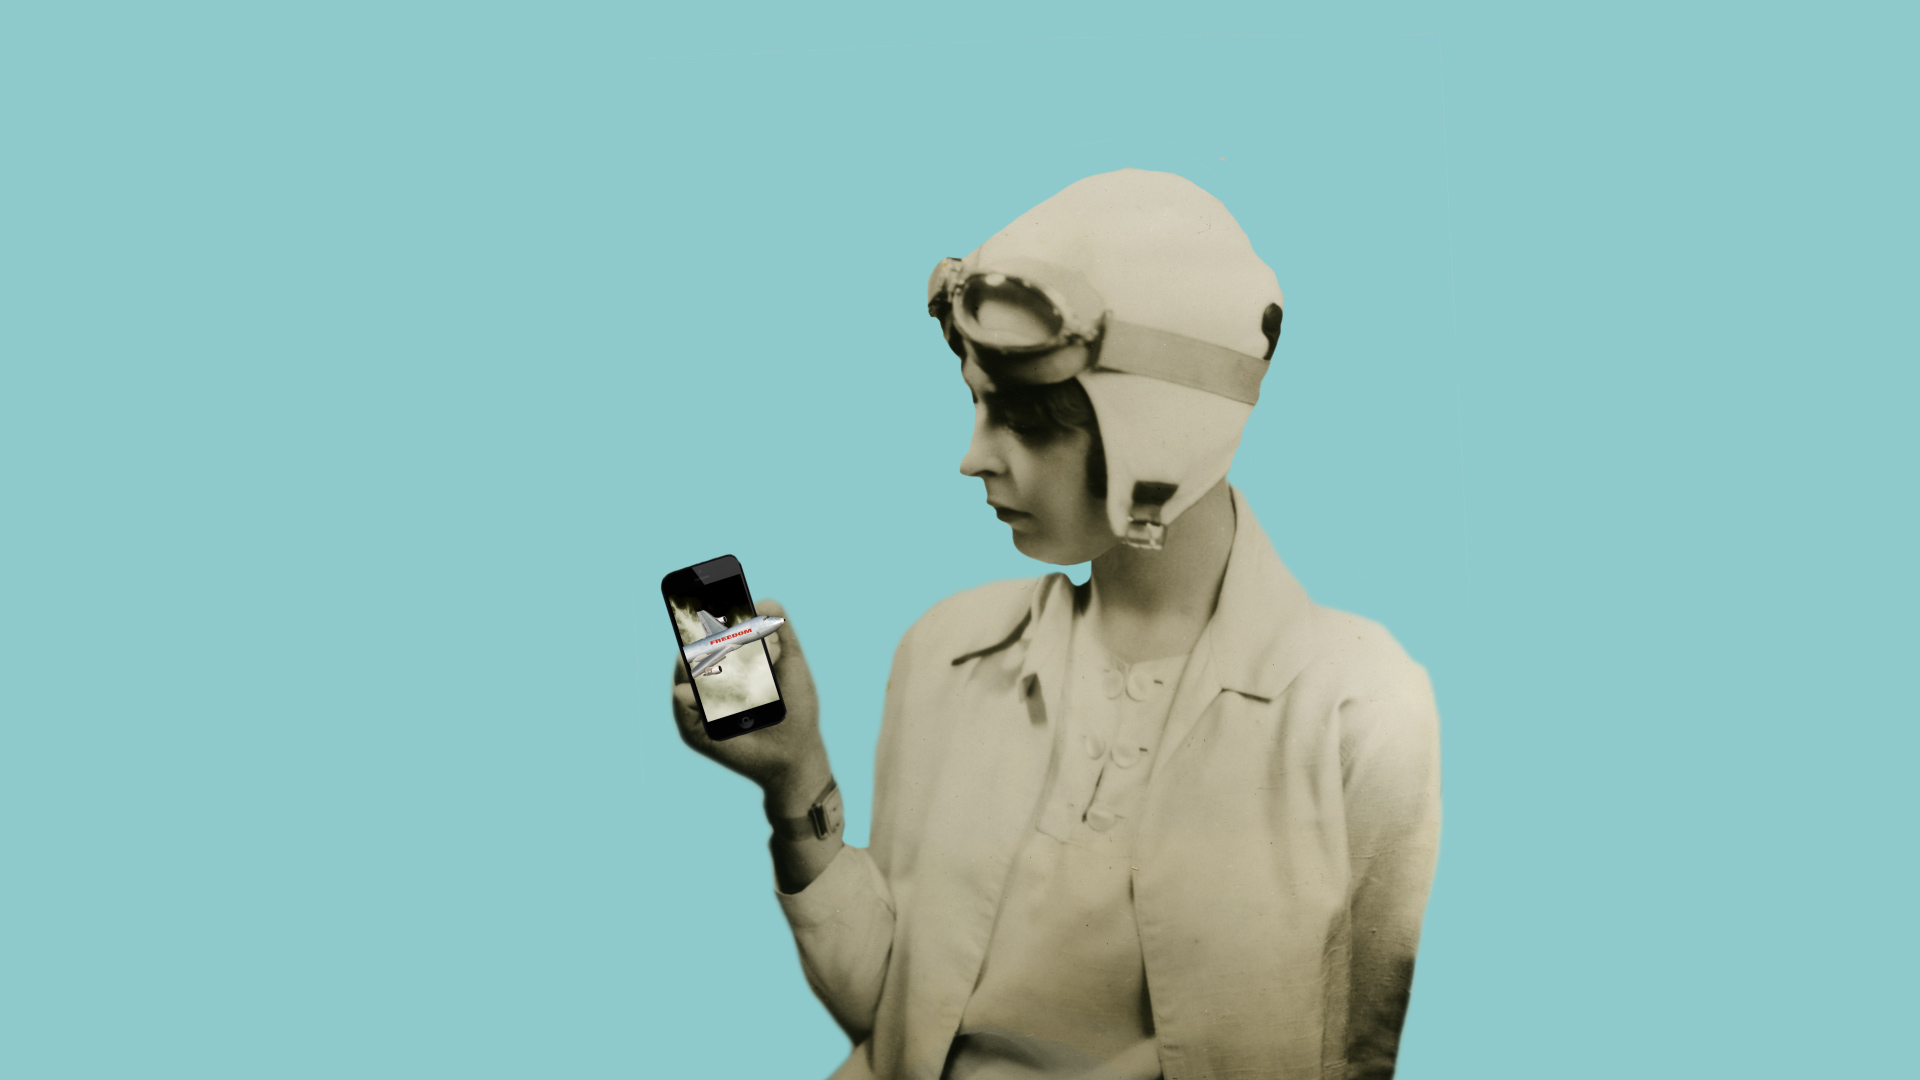 Digital collage of a woman wearing an aviator's helmet holding a cellphone with an airplane flying out of it.